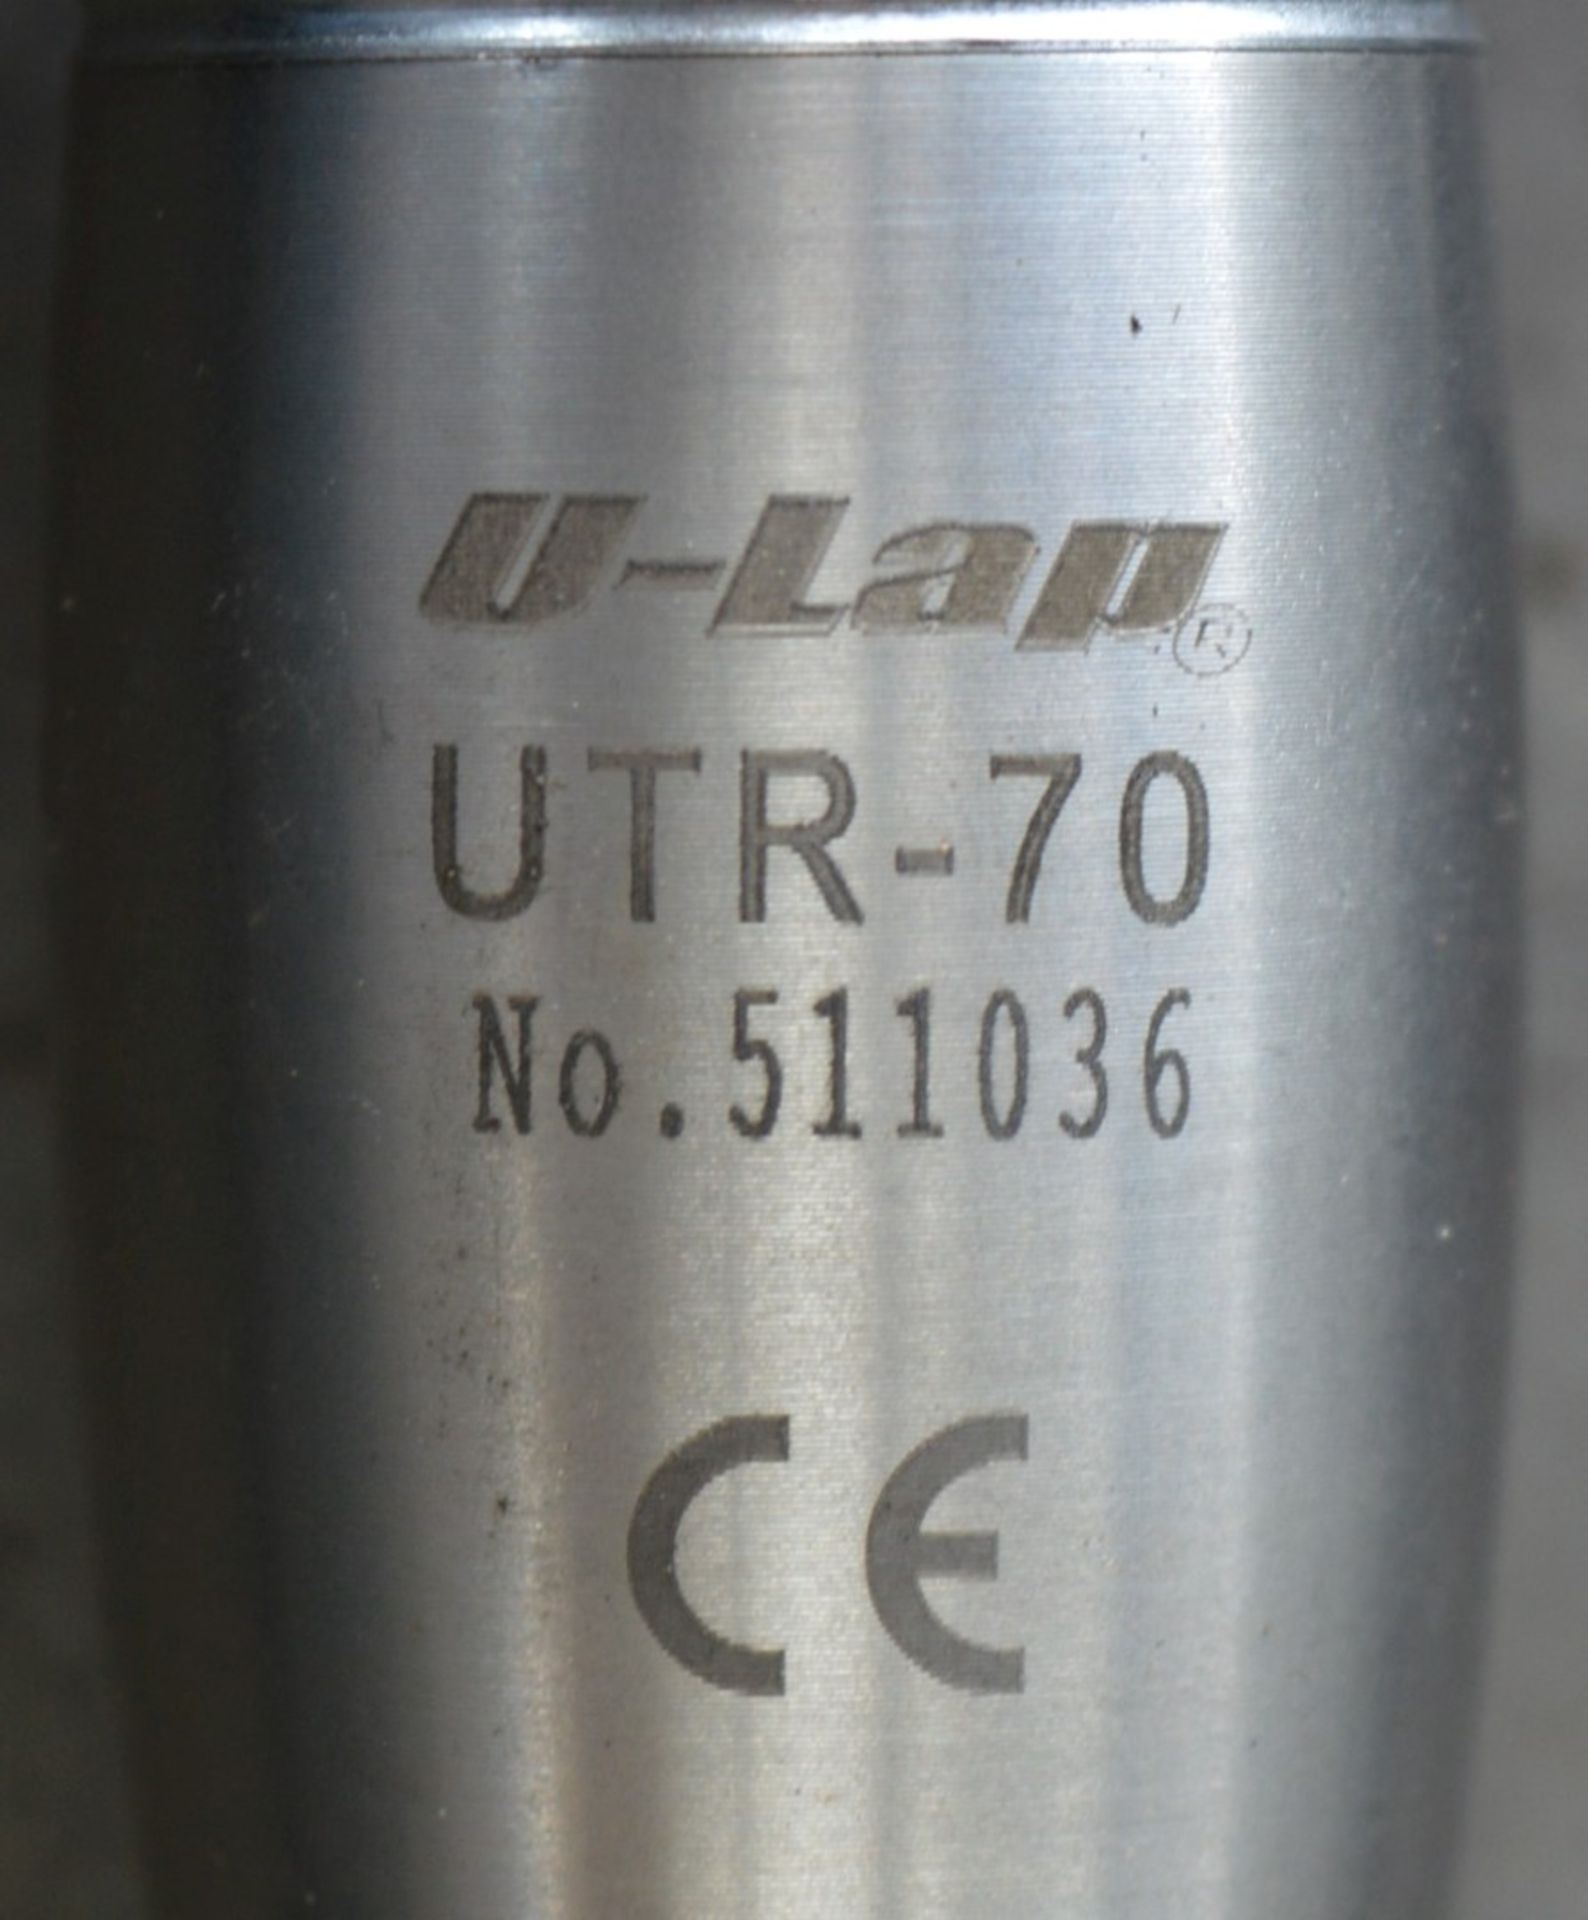 1 x UltraLap UTR-70 Air Powered Filng Hand Tool - CL202 - Ref EN182 - Location: Worcester WR14 - RRP - Image 2 of 3